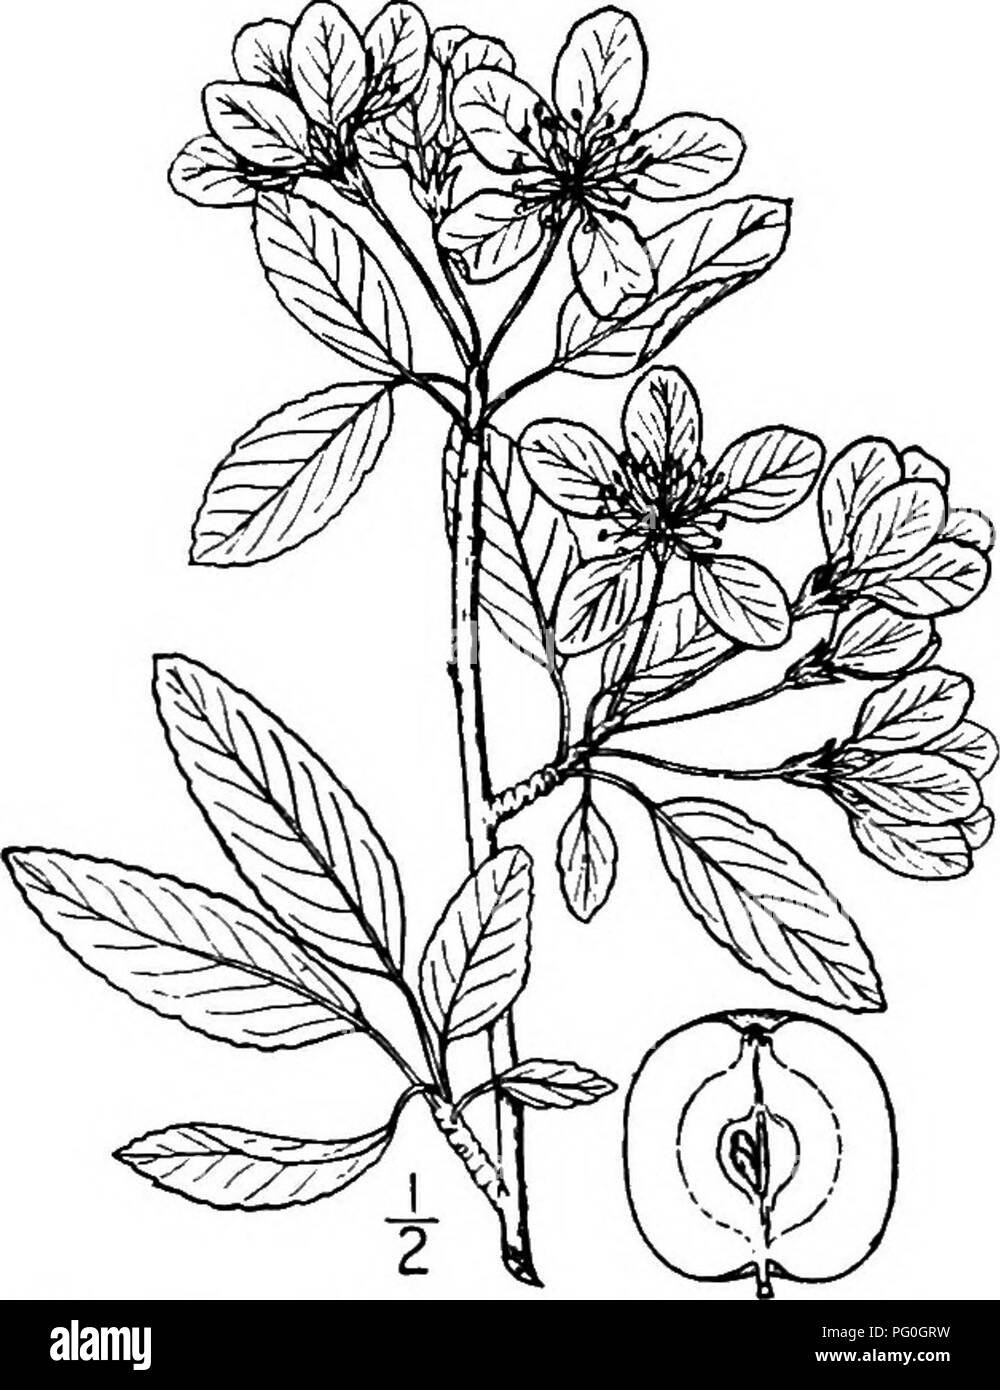 . North American trees : being descriptions and illustrations of the trees growing independently of cultivation in North America, north of Mexico and the West Indies . Trees. 432 The Apples. Fig. 377. — Narrow-leaved Crab Apple. The wood is hard, close-grained, hght red- dish brown; its speciiic gravity about 0.68. It is sometimes used in the manufacture of tools, handles, and portions of machinery. The tree is also called Southern crab apple. The fruit is used for jellies and cider. This is one of the most charming of North American trees on account of its abimdance of showy, fragrant flowers Stock Photo